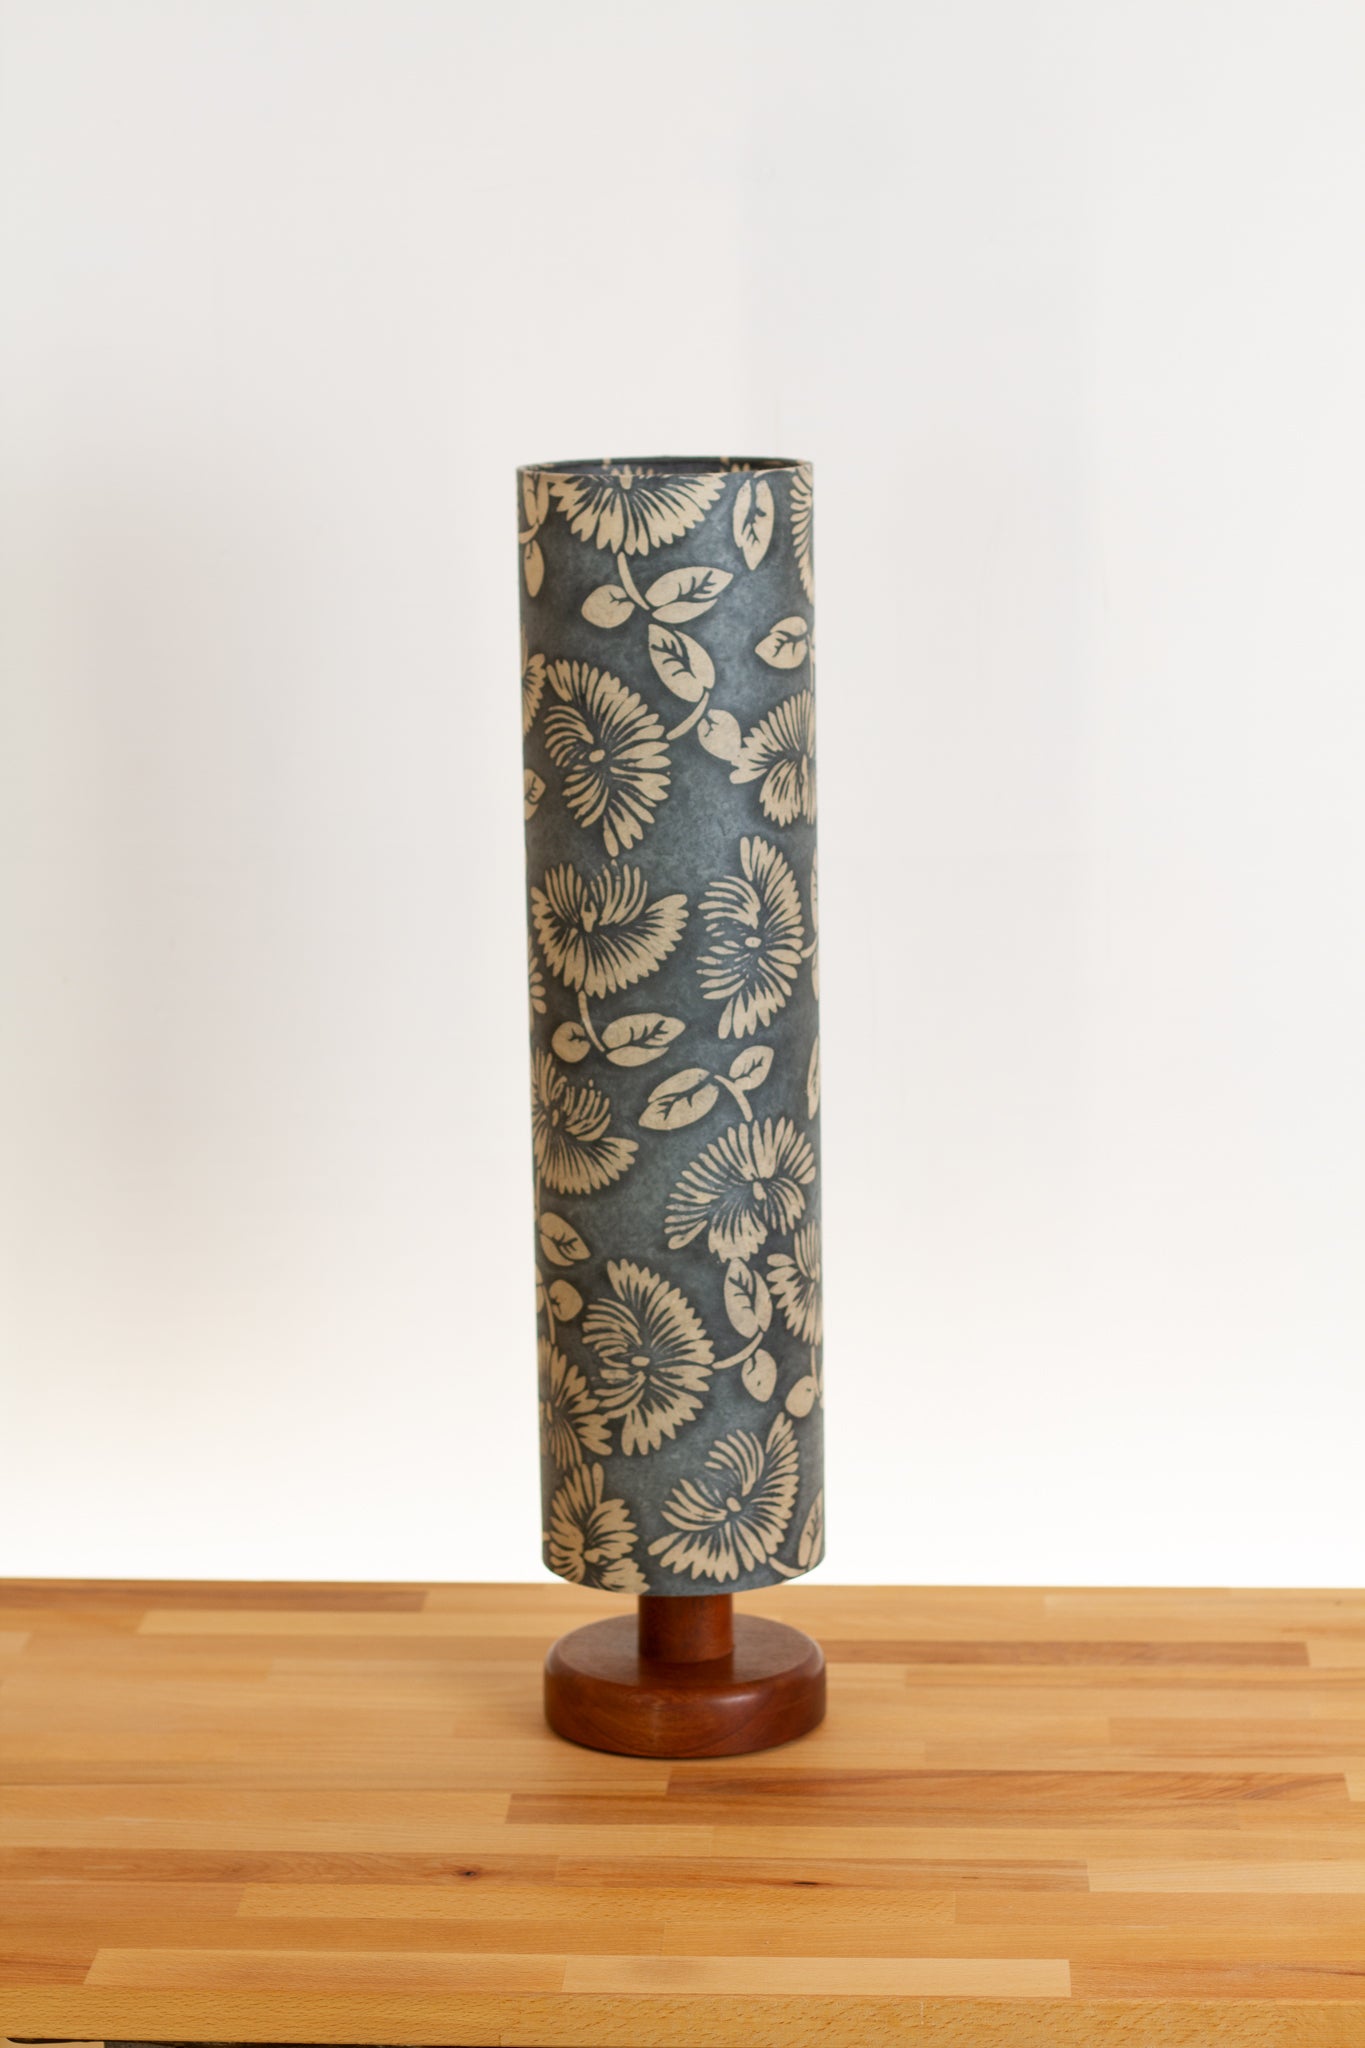 Round Sapele Table Lamp with 15cm x 65cm Lampshade in B119 ~ Batik Peony Grey